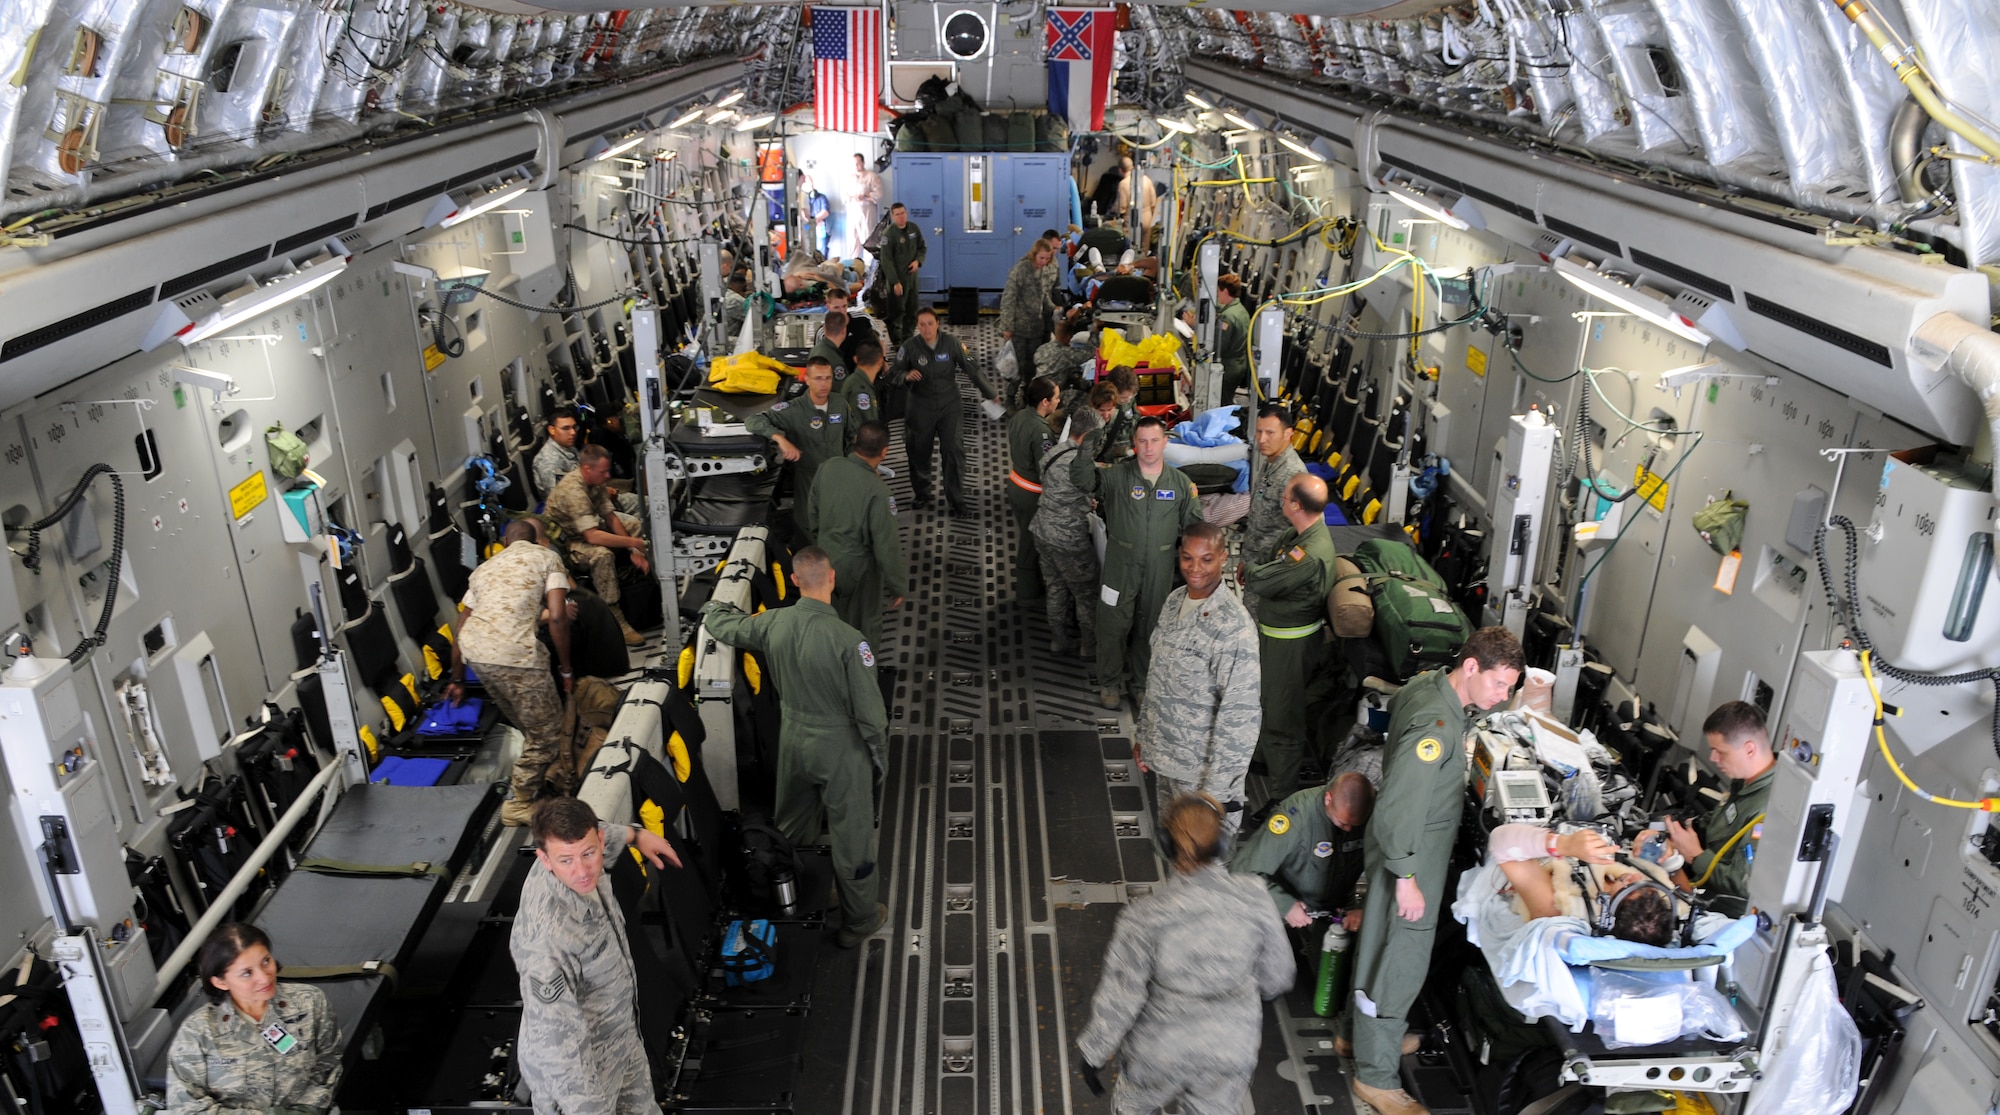 U.S. Military Forces from the 86th Contingency Aeromedical Staging Facility and 86th Aeromedical Evacuation Squadron prepare a C-17 Globemaster III to load wounded warriors on Ramstein Air Base, Germany, Aug. 18, 2009. From Ramstein, the wounded warriors get loaded on a C-17 Globemaster III to transport them to Walter Reed Army Medical Facility, Washington, D.C. for further medical treatment. (U.S. Air Force photo by Airman 1st Class Grovert Fuentes-Contreras)